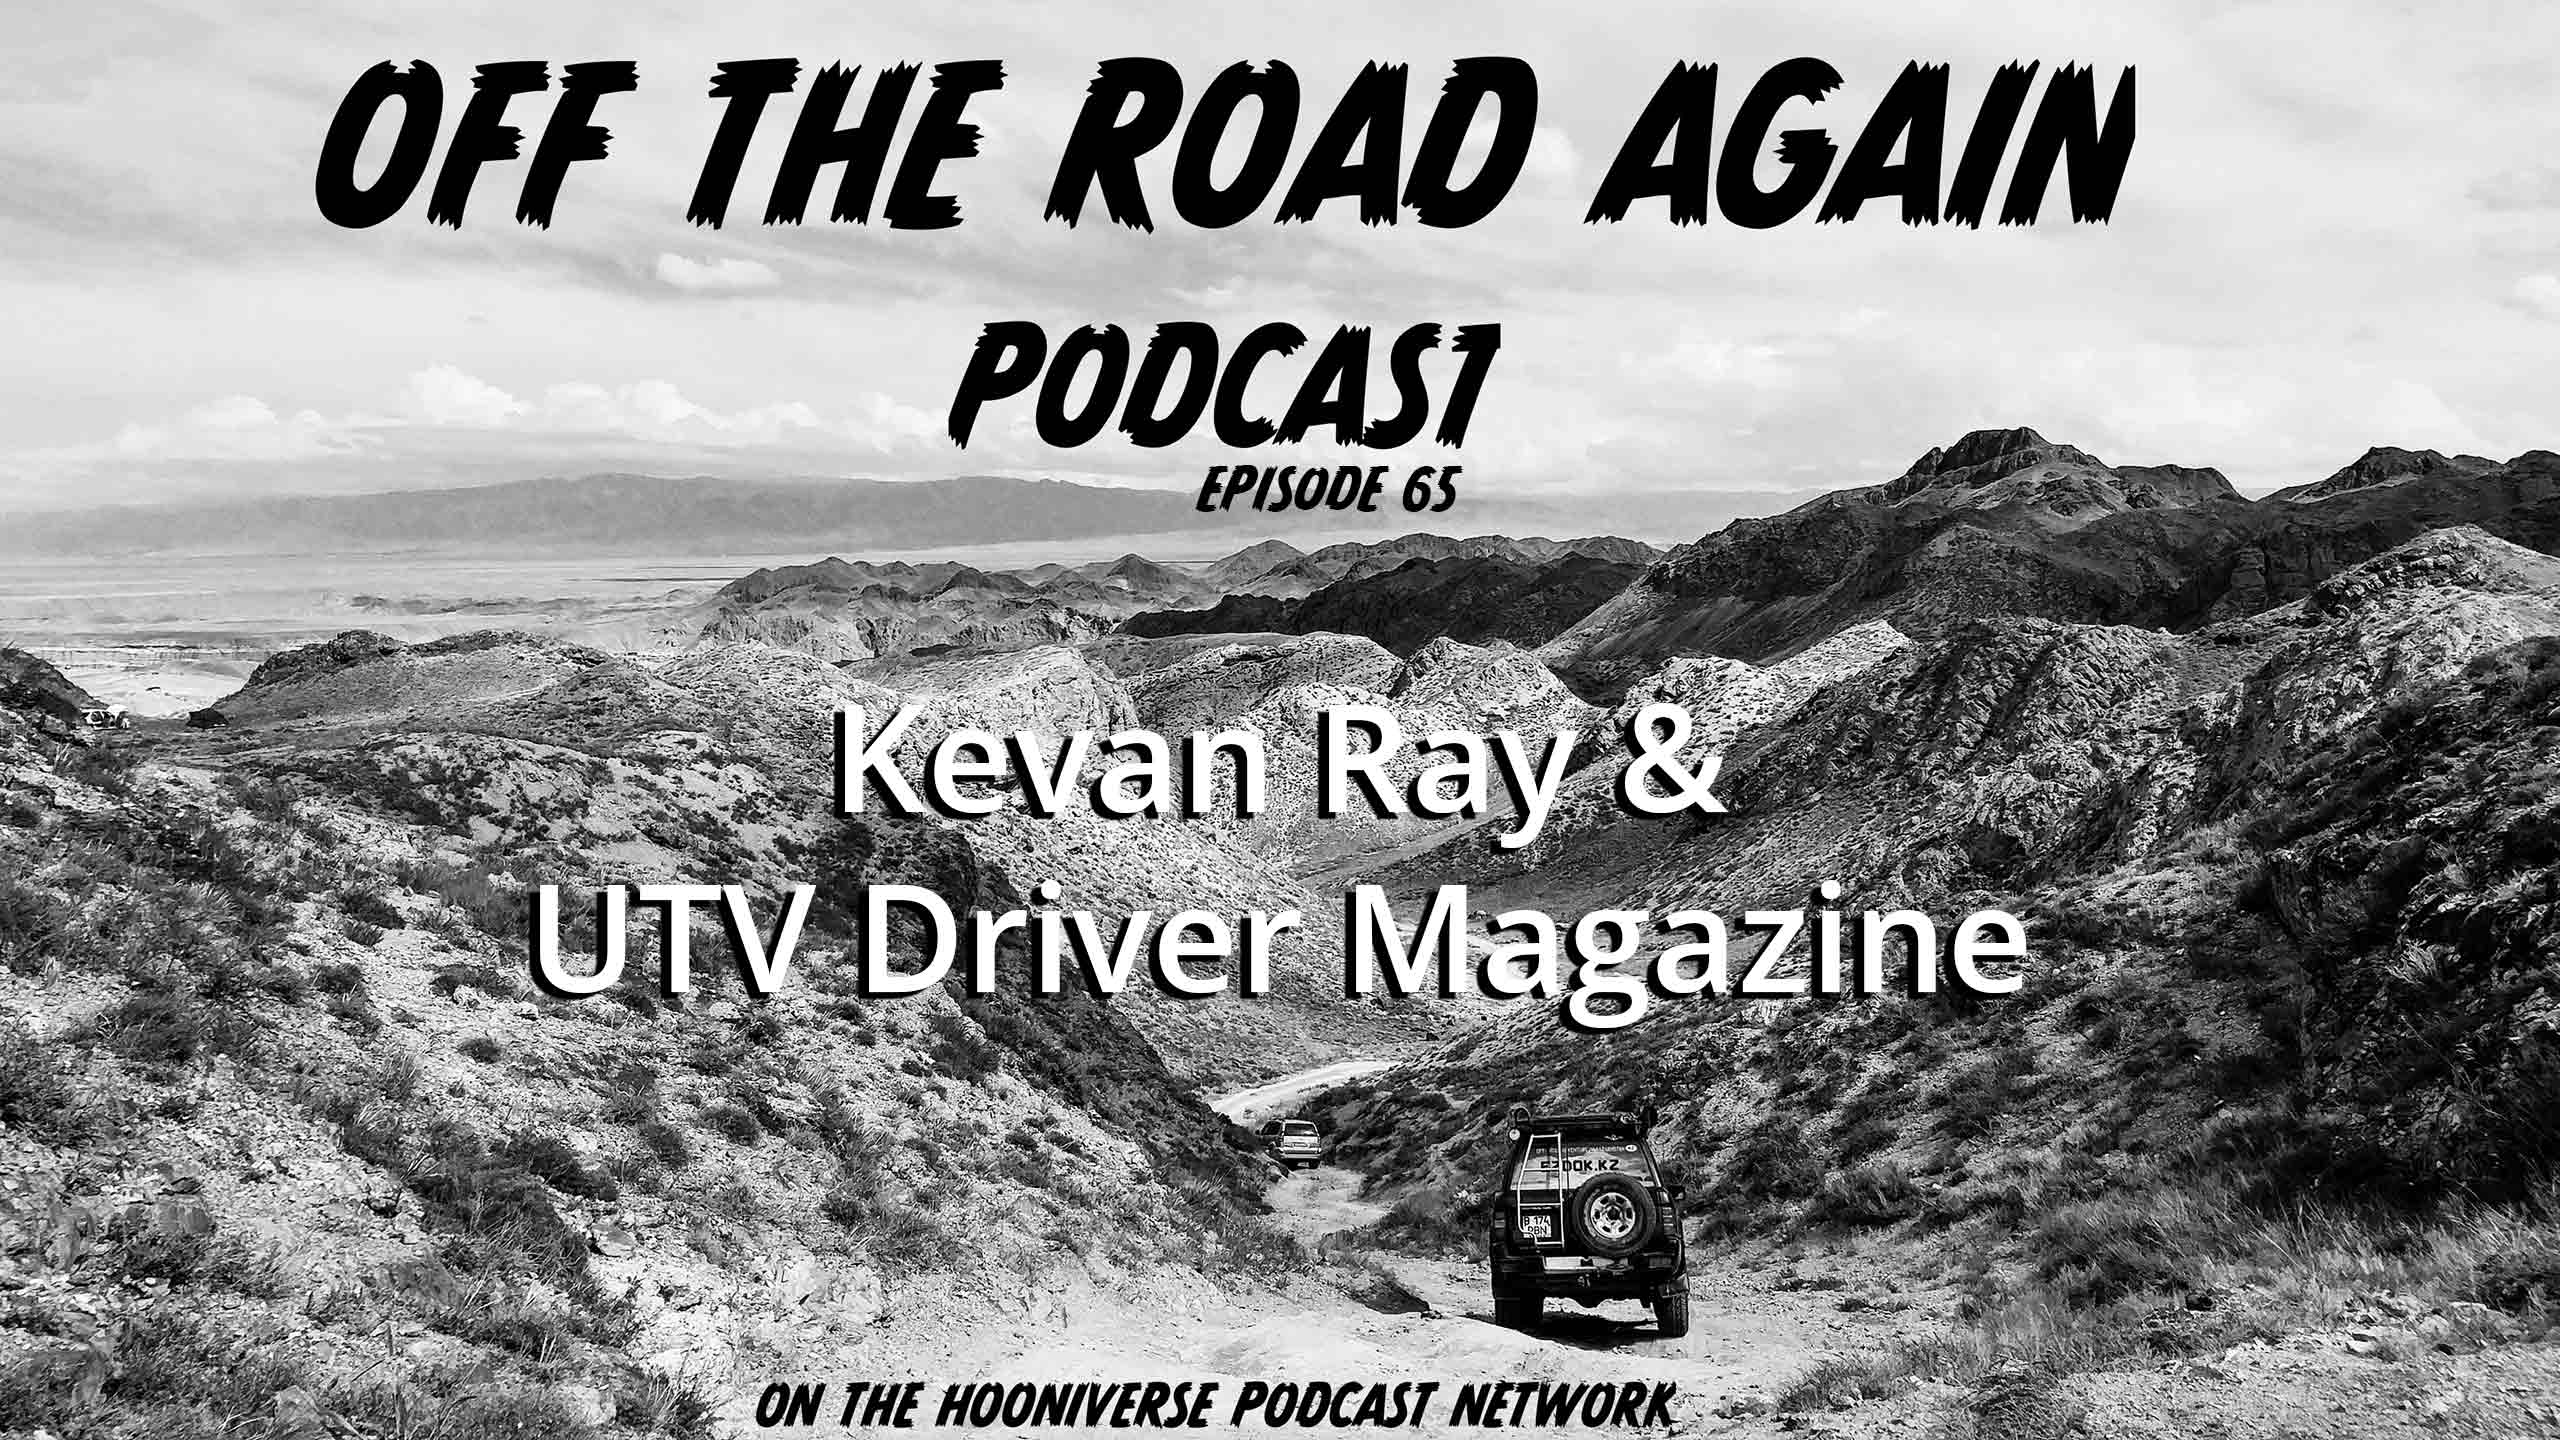 Kevan-Ray-UTV-Driver-Magazine-Off-The-Road-Again-Podcast-Episode-65